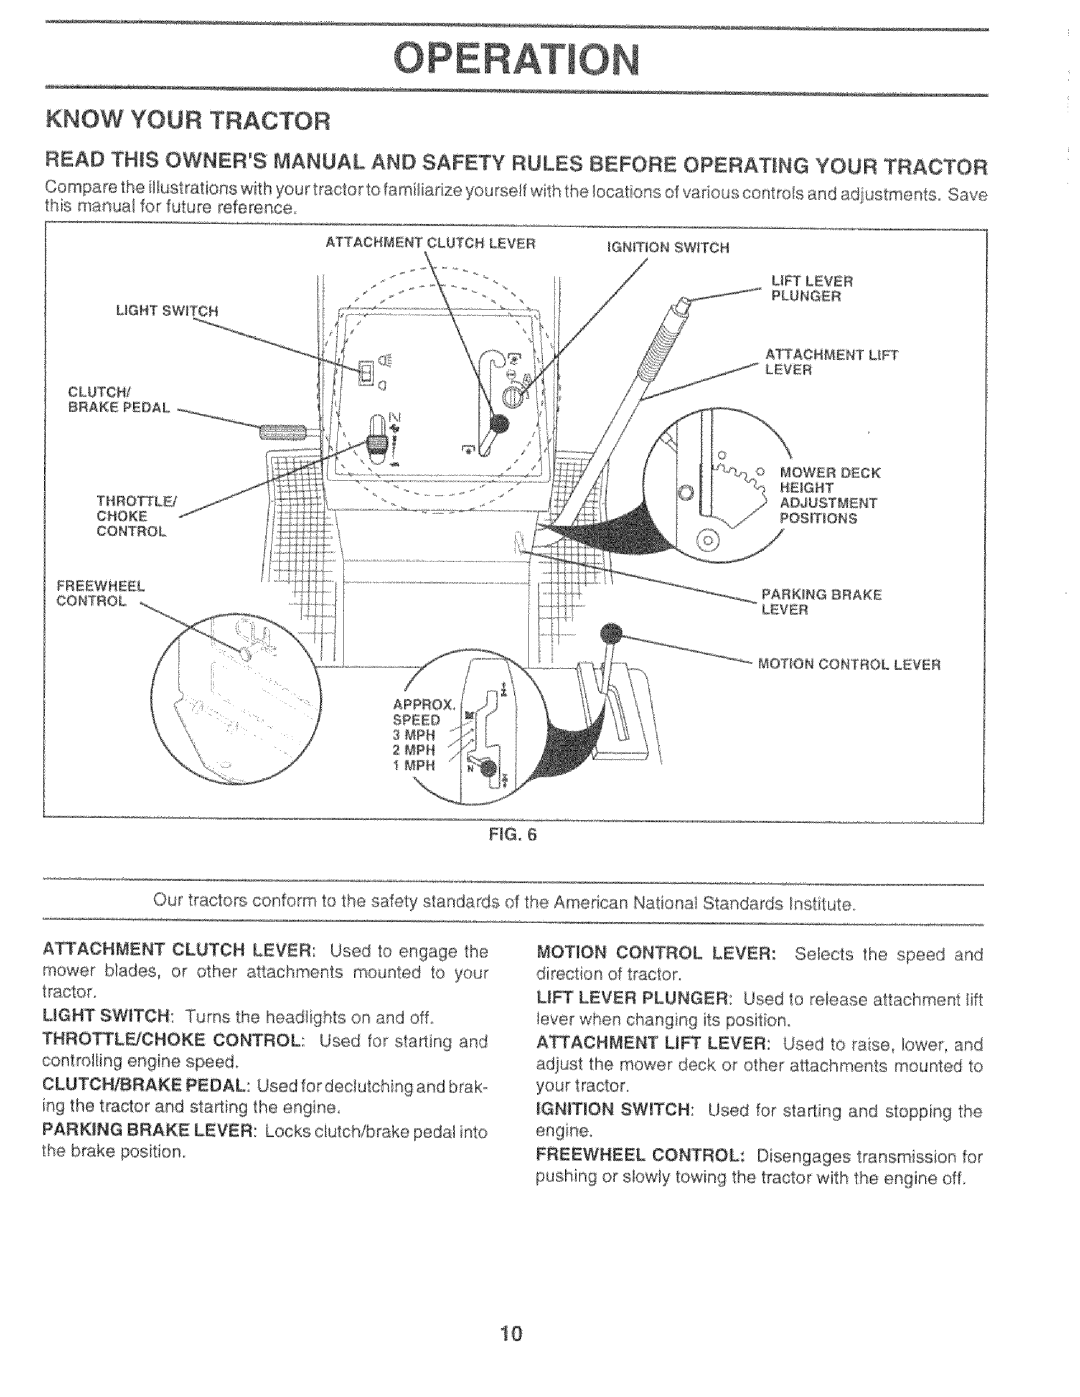 Sears 917.25759 manual Know Your Tractor 